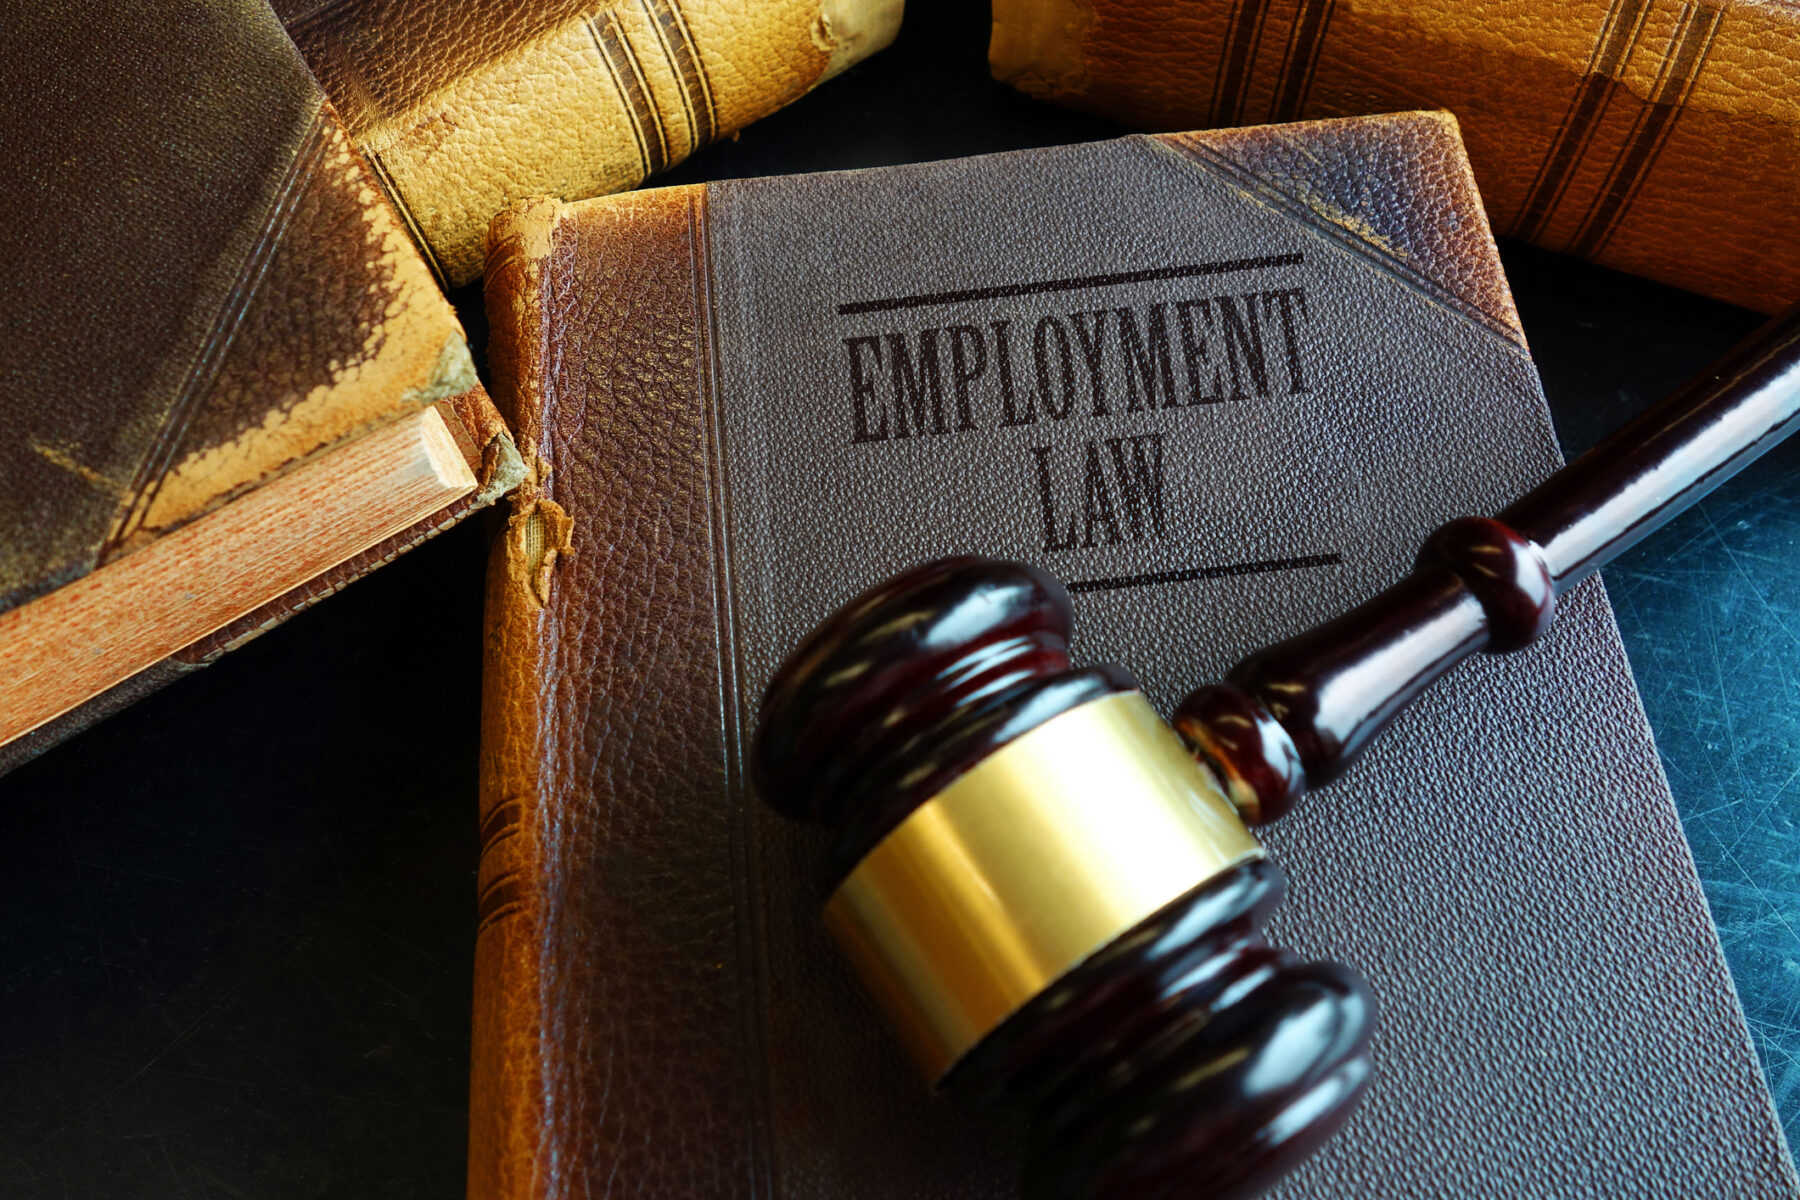 New Employment Regulations Issued by ADGM